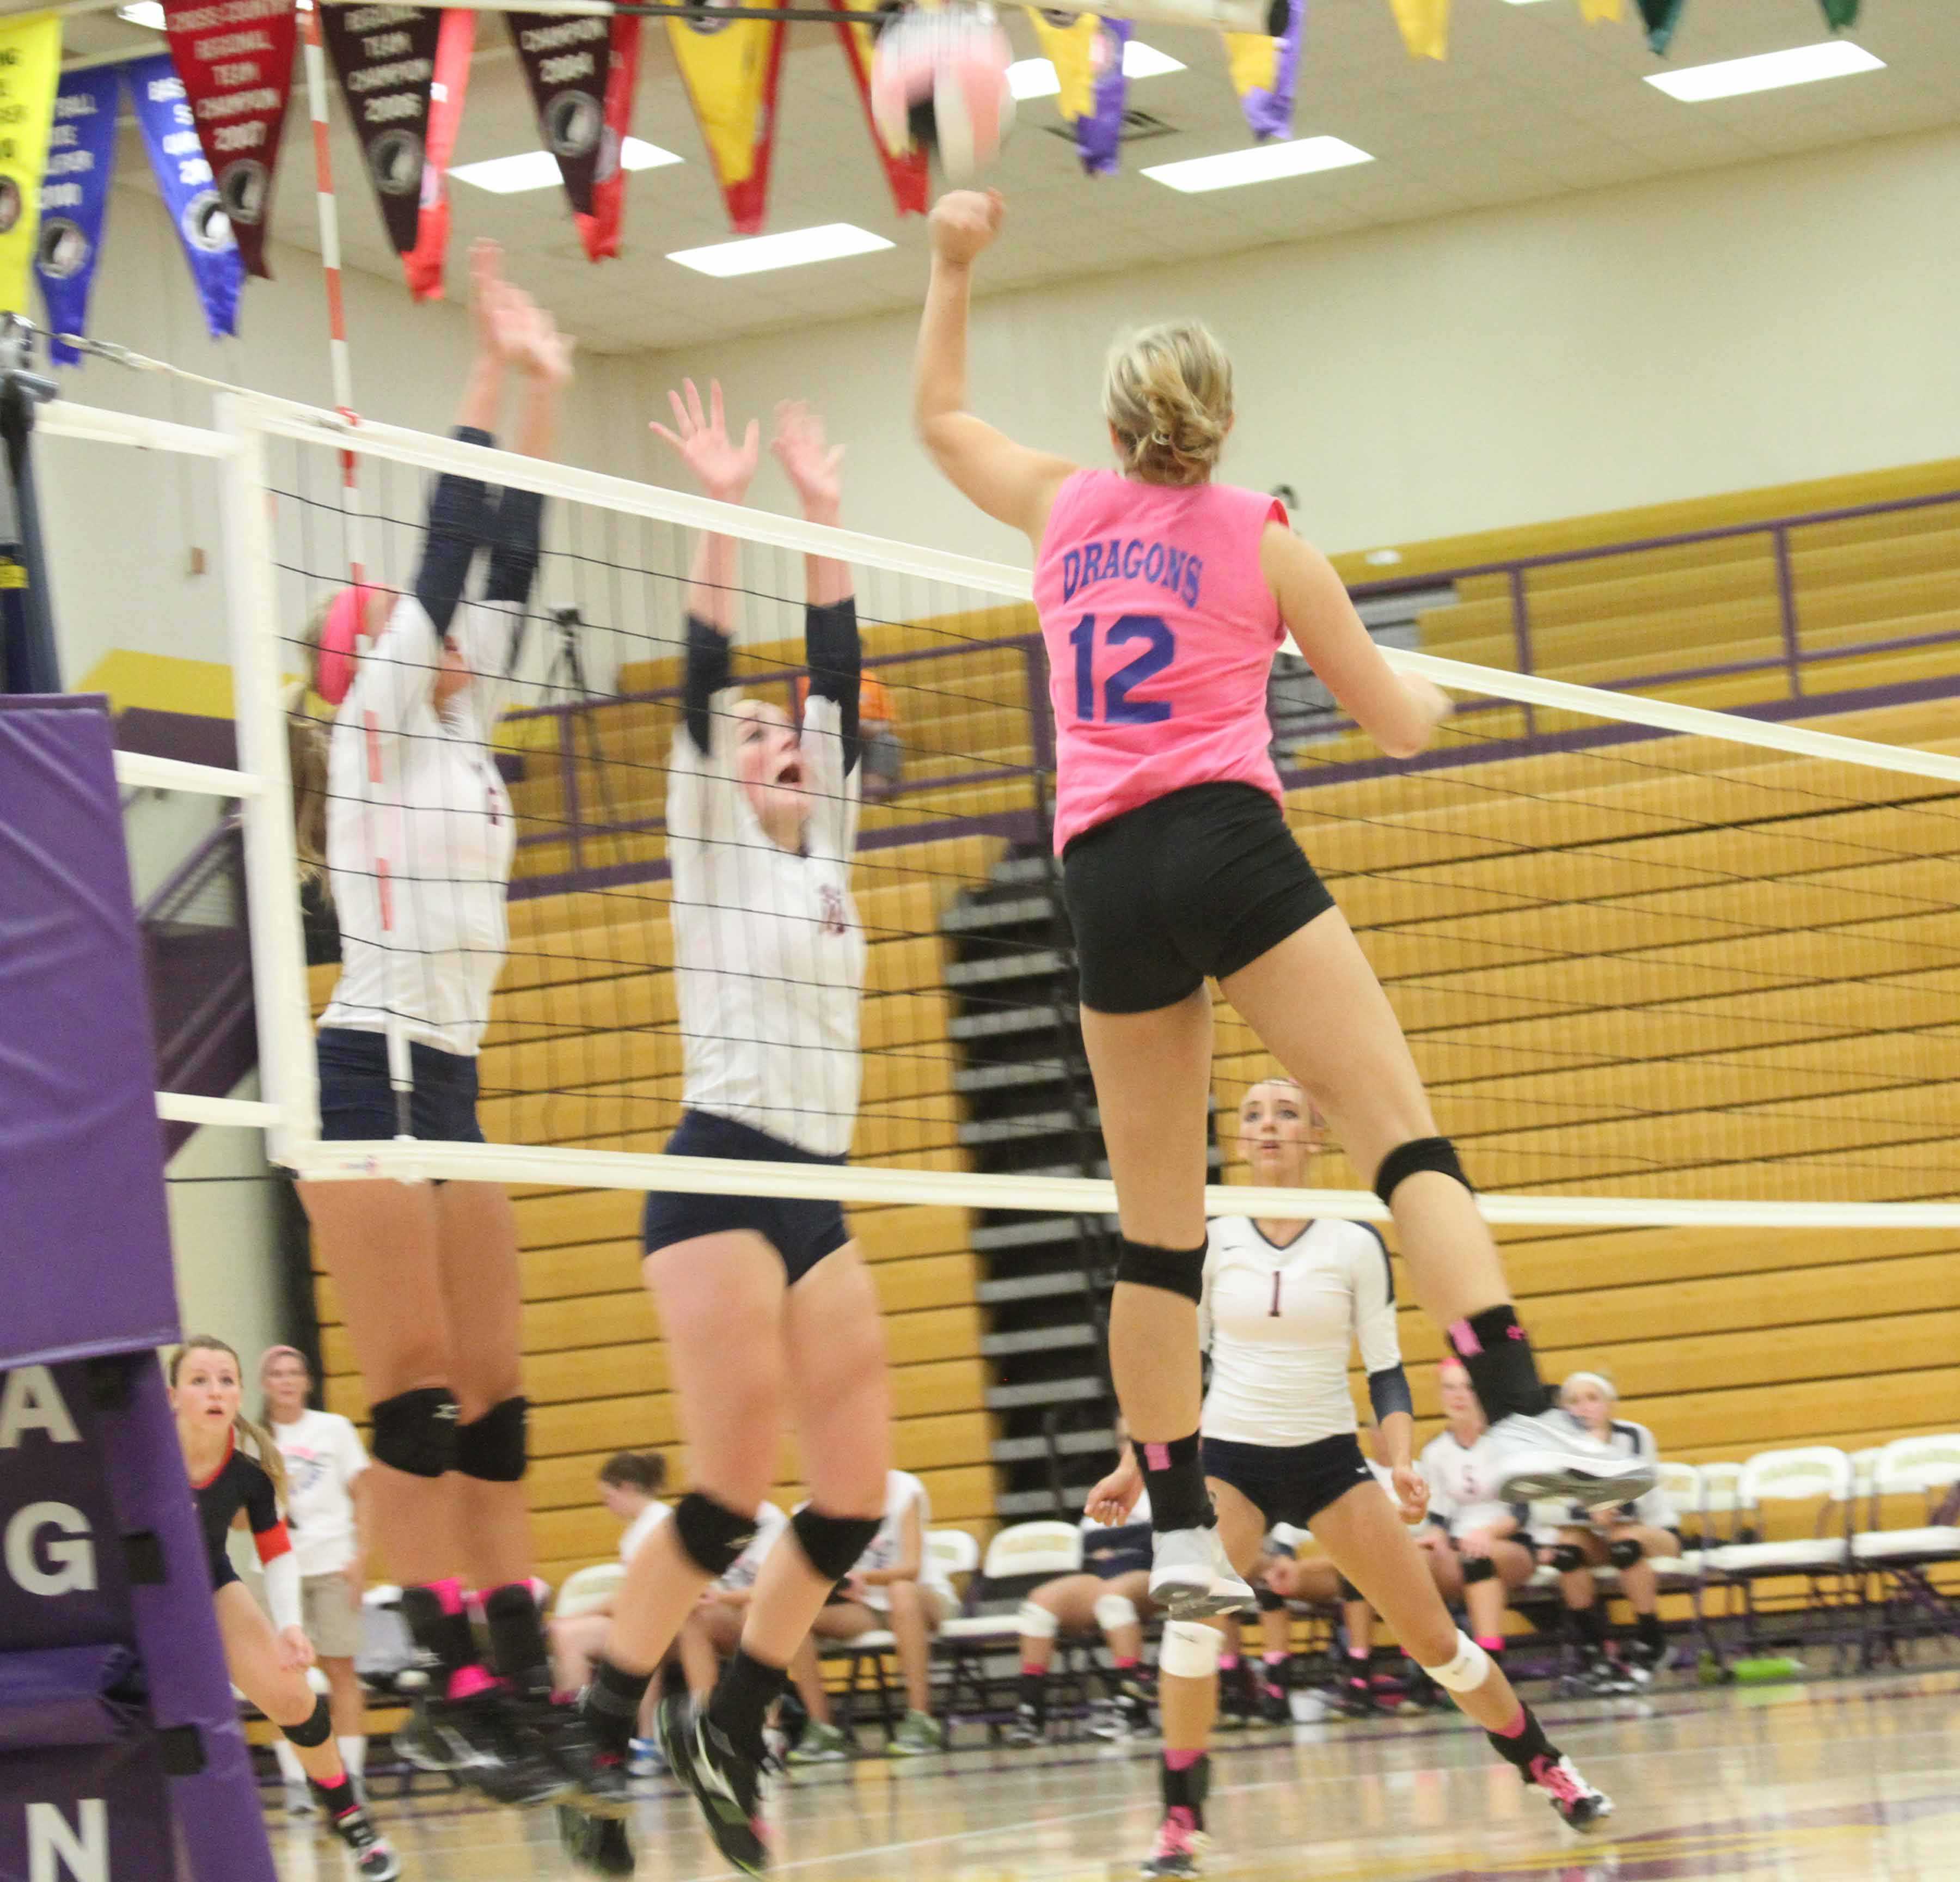 Senior Madeline Miller jumps up to spike the ball during the first set of Dig Pink Spike Blue. After playing five games, Johnston fell to Urbandale in extra points with a score of 17-15.